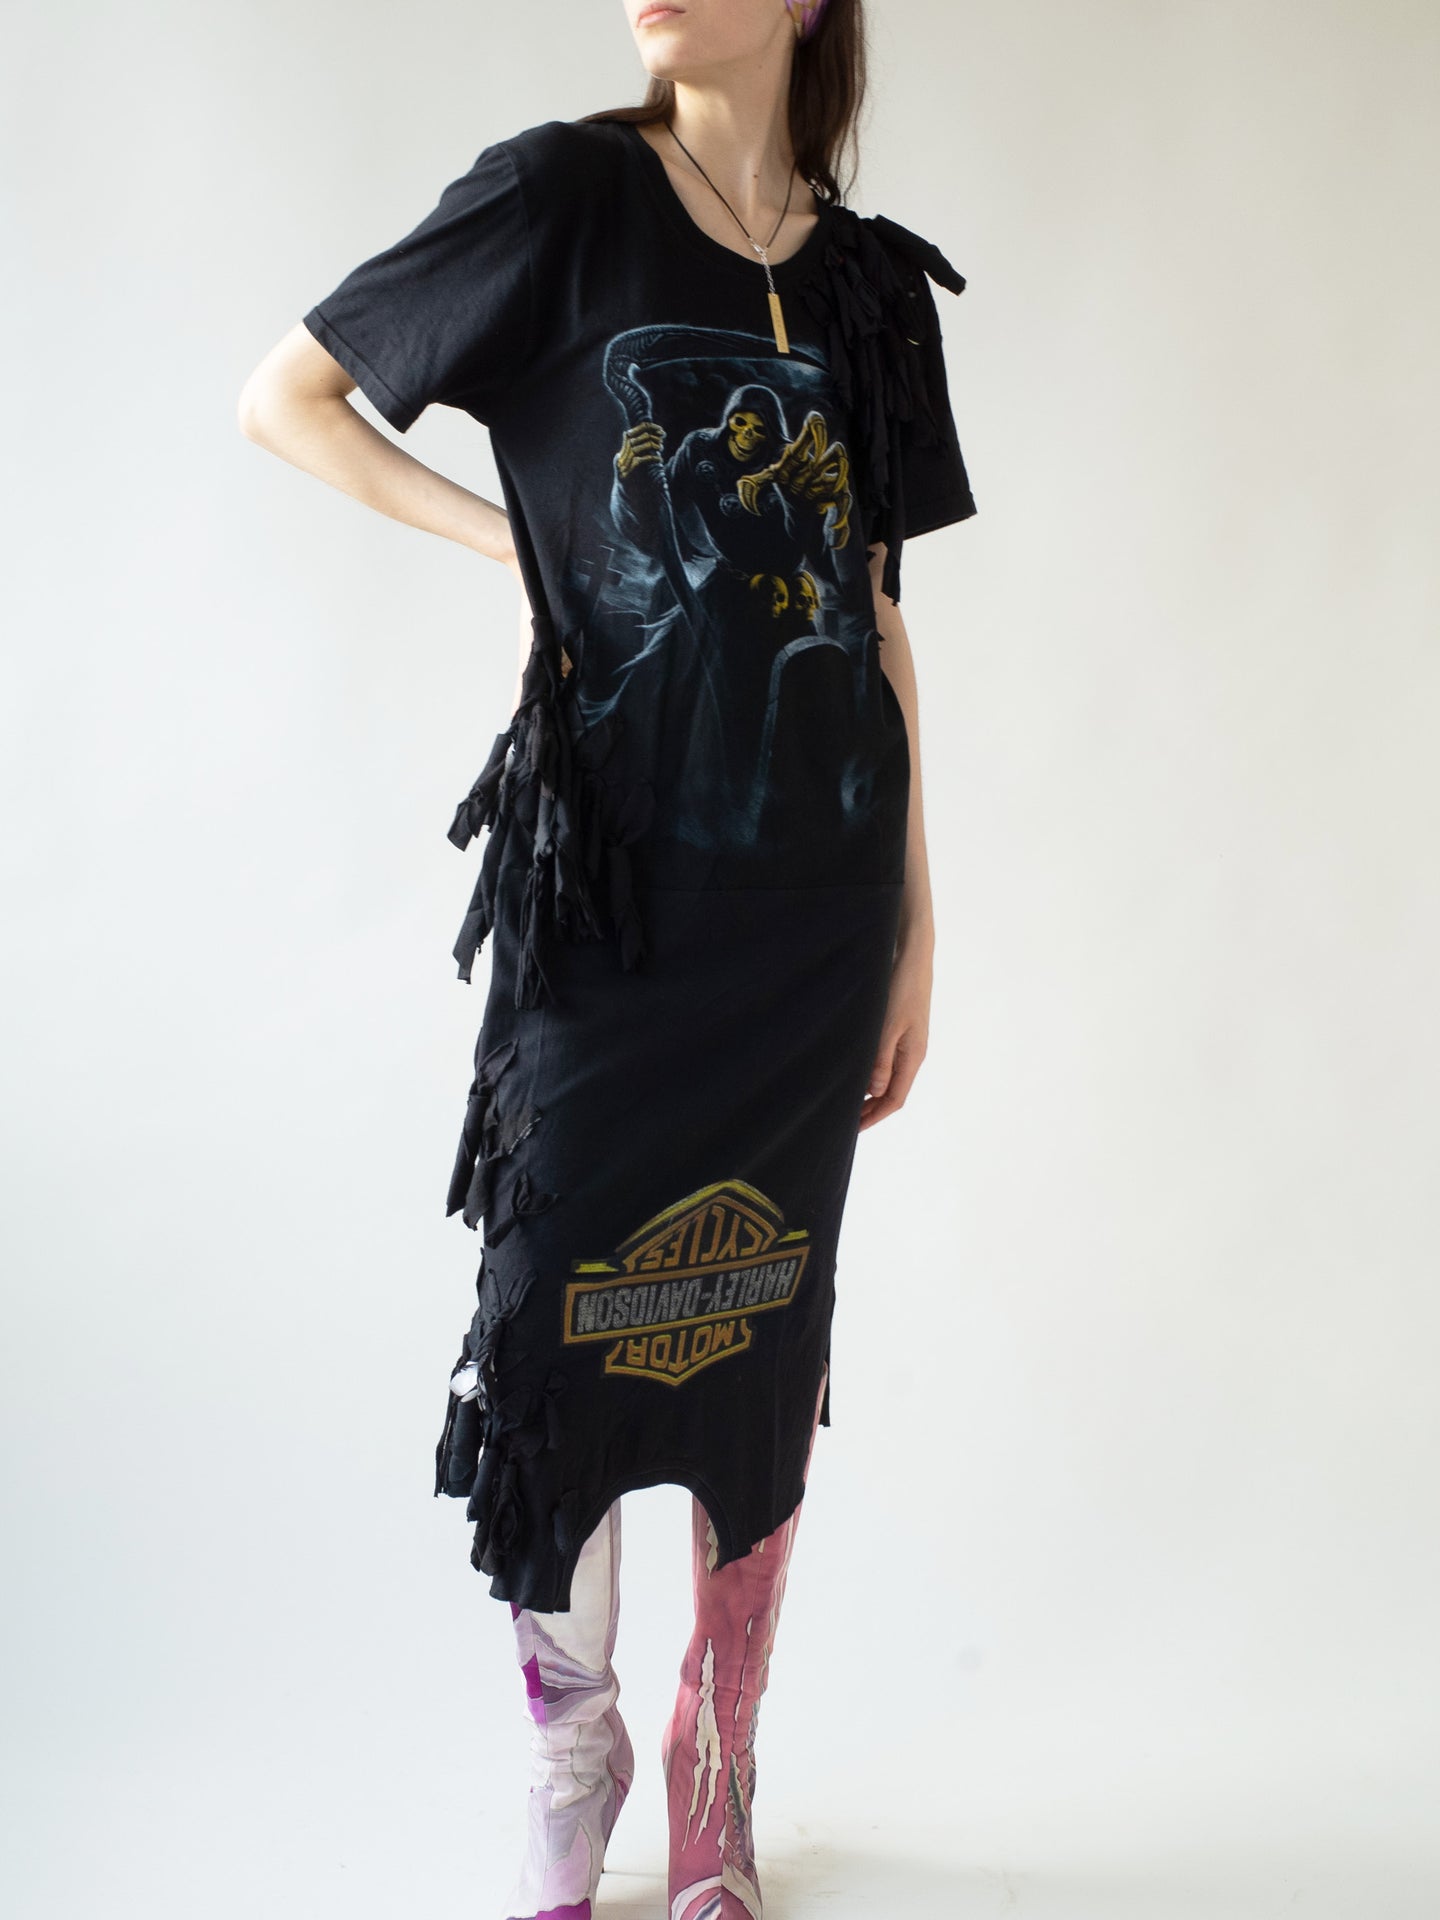 The Reconstituted Flower t-shirt Dress